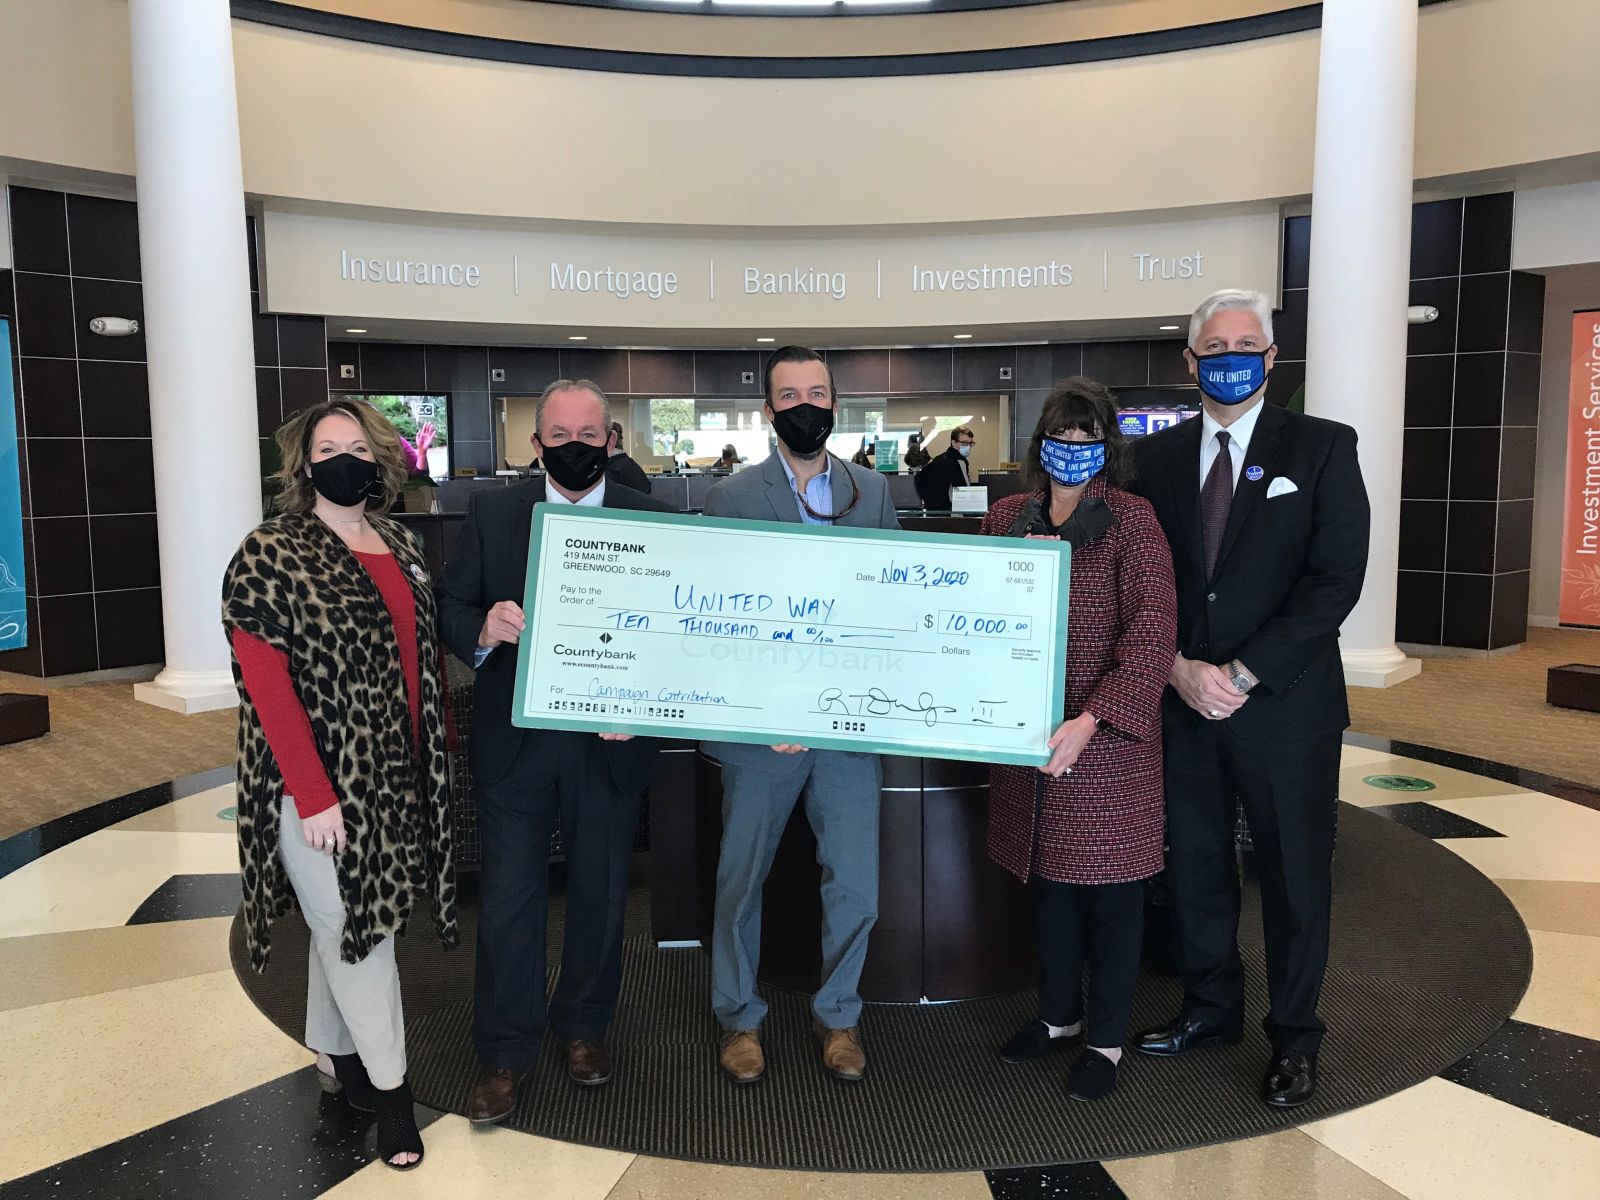 Countybank's Danielle Fields, Tony Lawton and Patrick Craven, United Way's Hannah Gantt and Greenwood Capital's John Cooper pose with the $26,936 donation. (Photo/Provided)